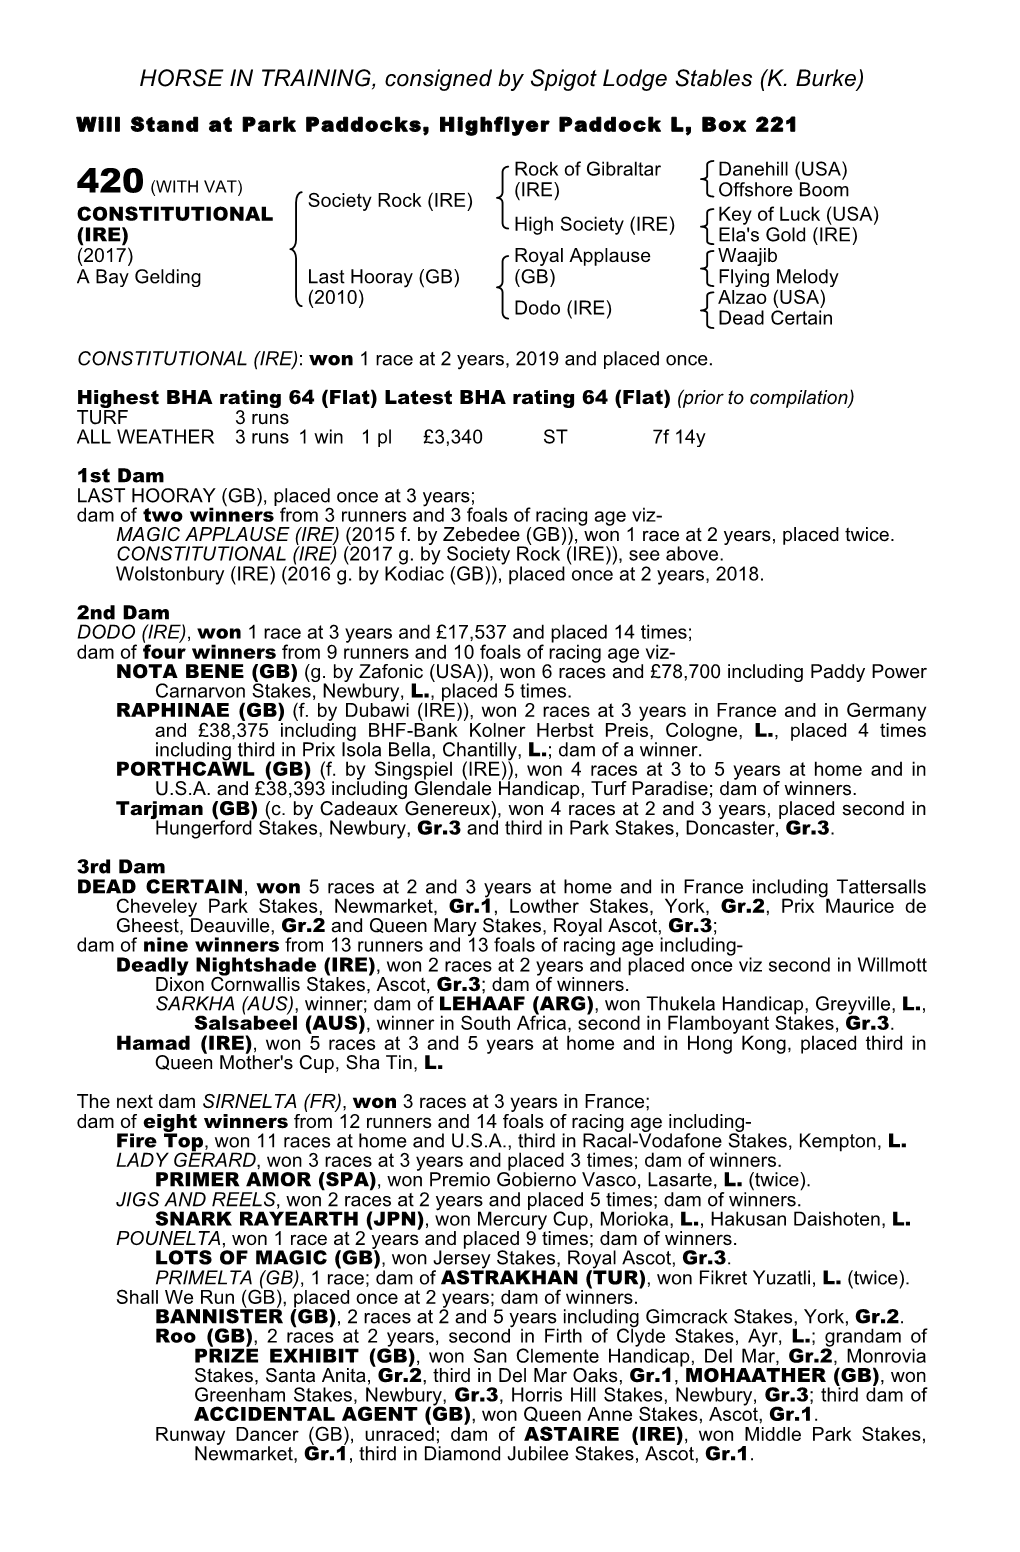 HORSE in TRAINING, Consigned by Spigot Lodge Stables (K